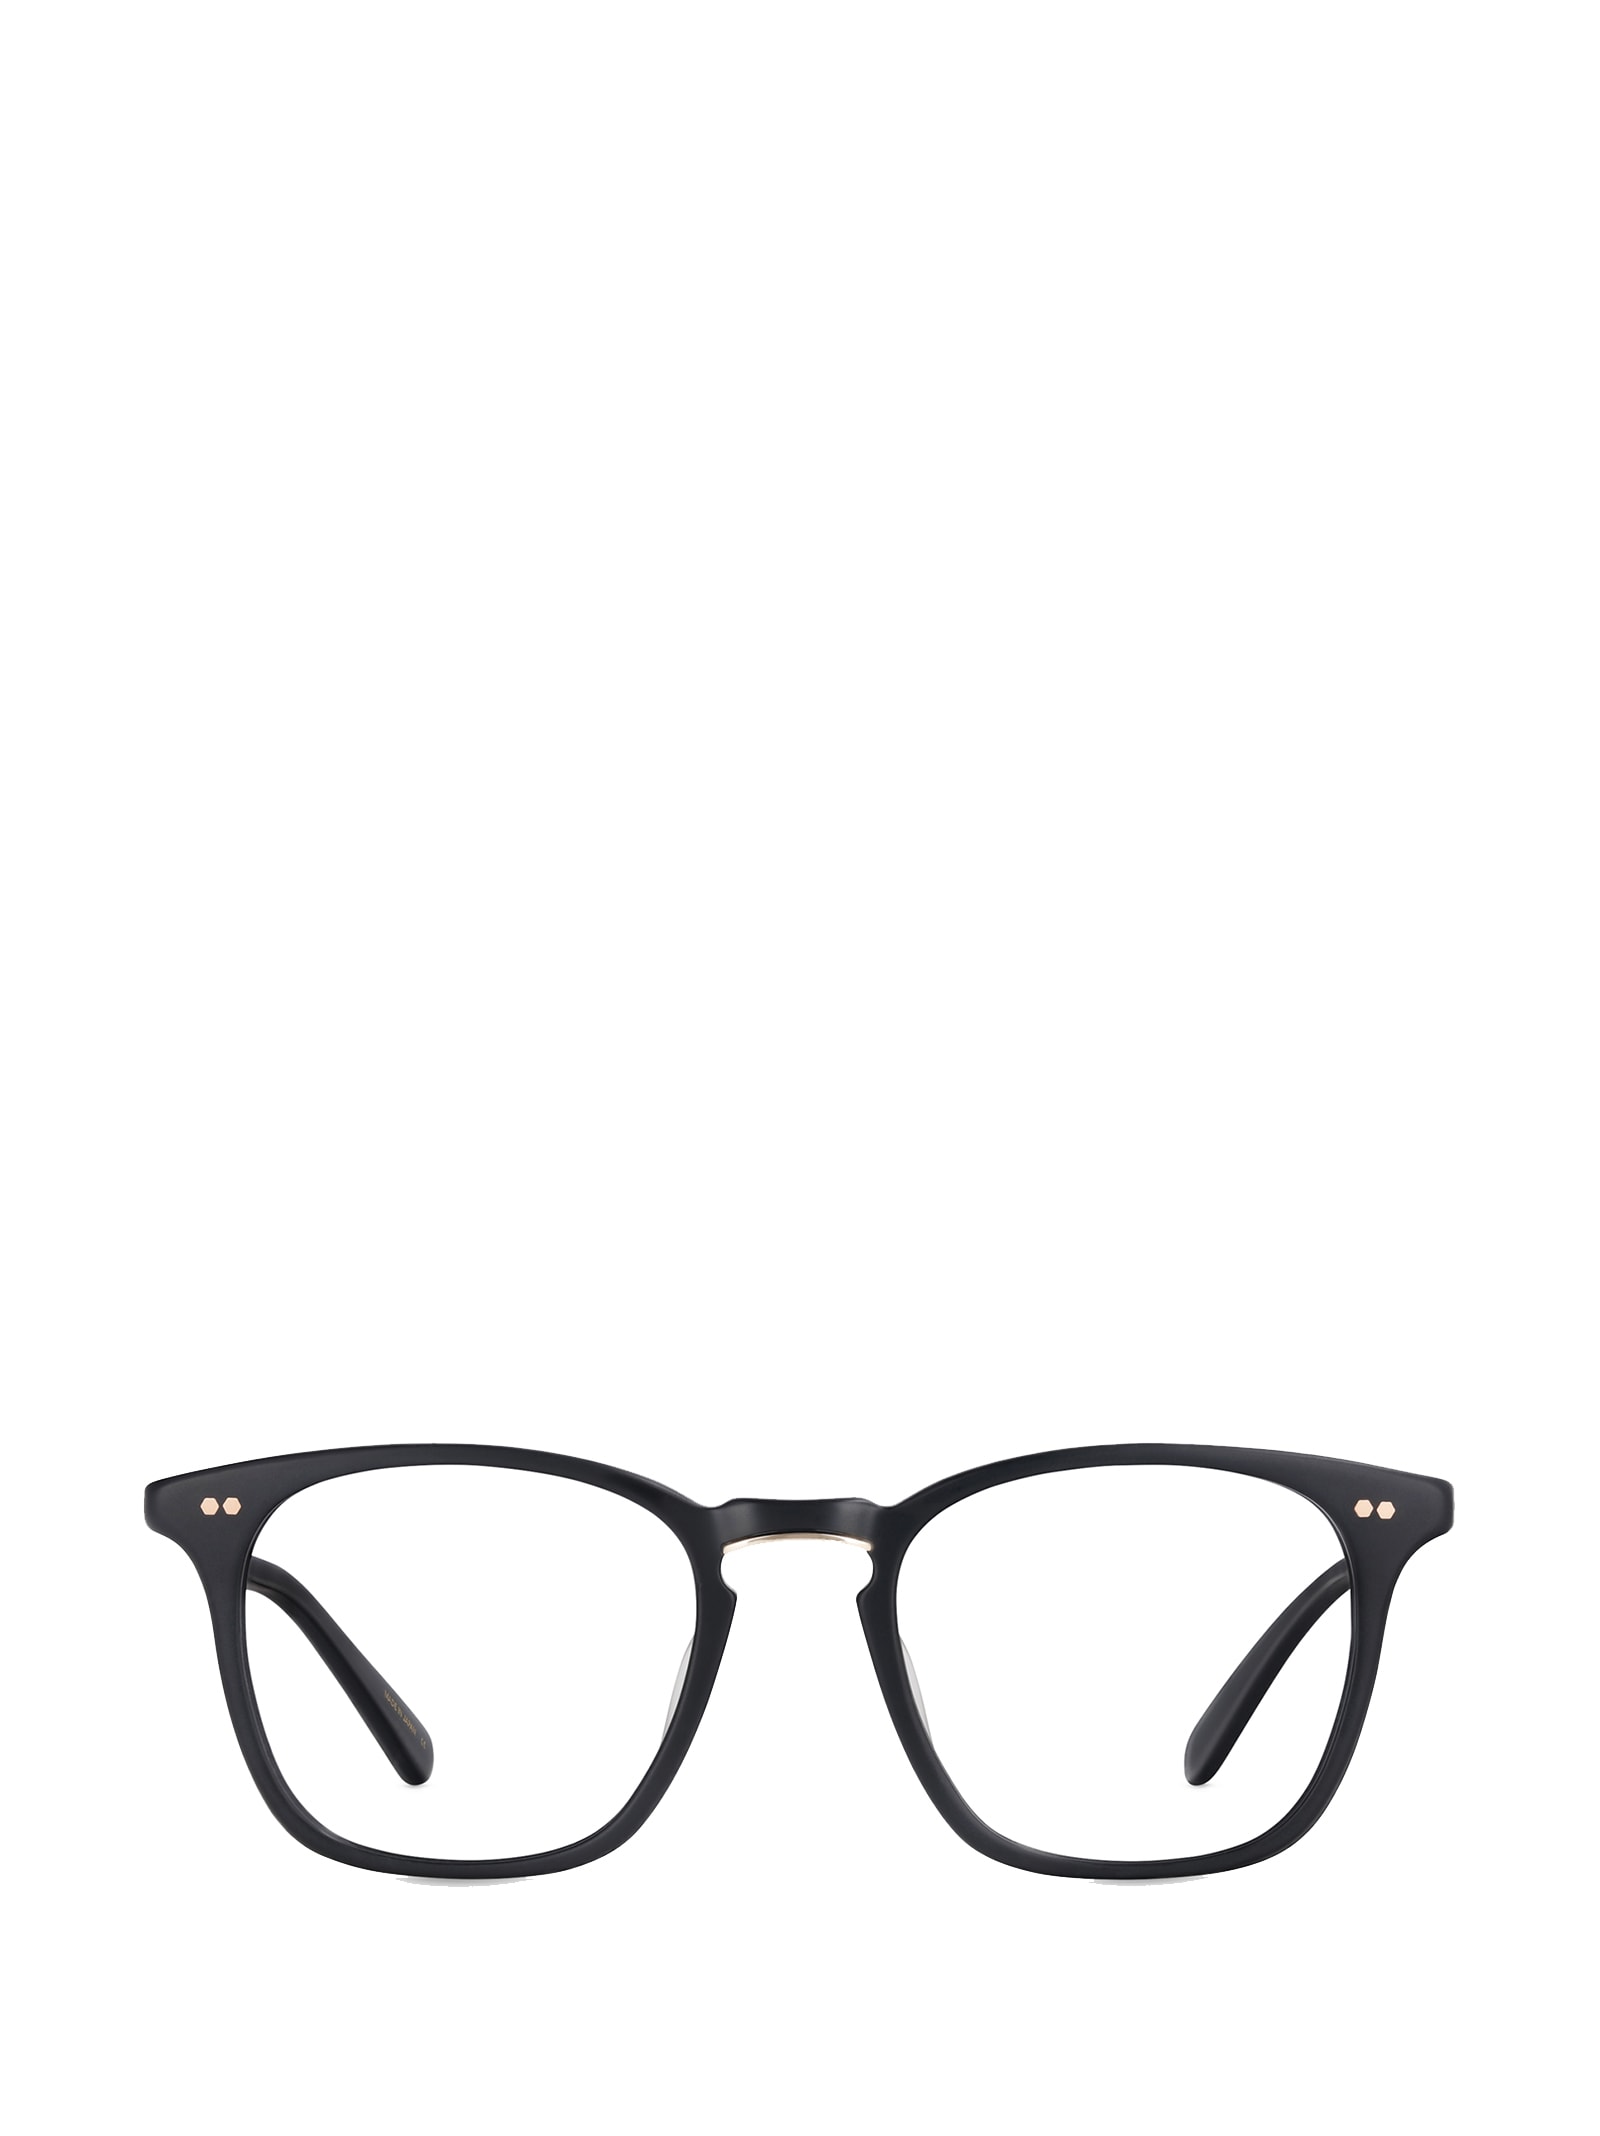 MR LEIGHT GETTY C MBK-12KWG GLASSES